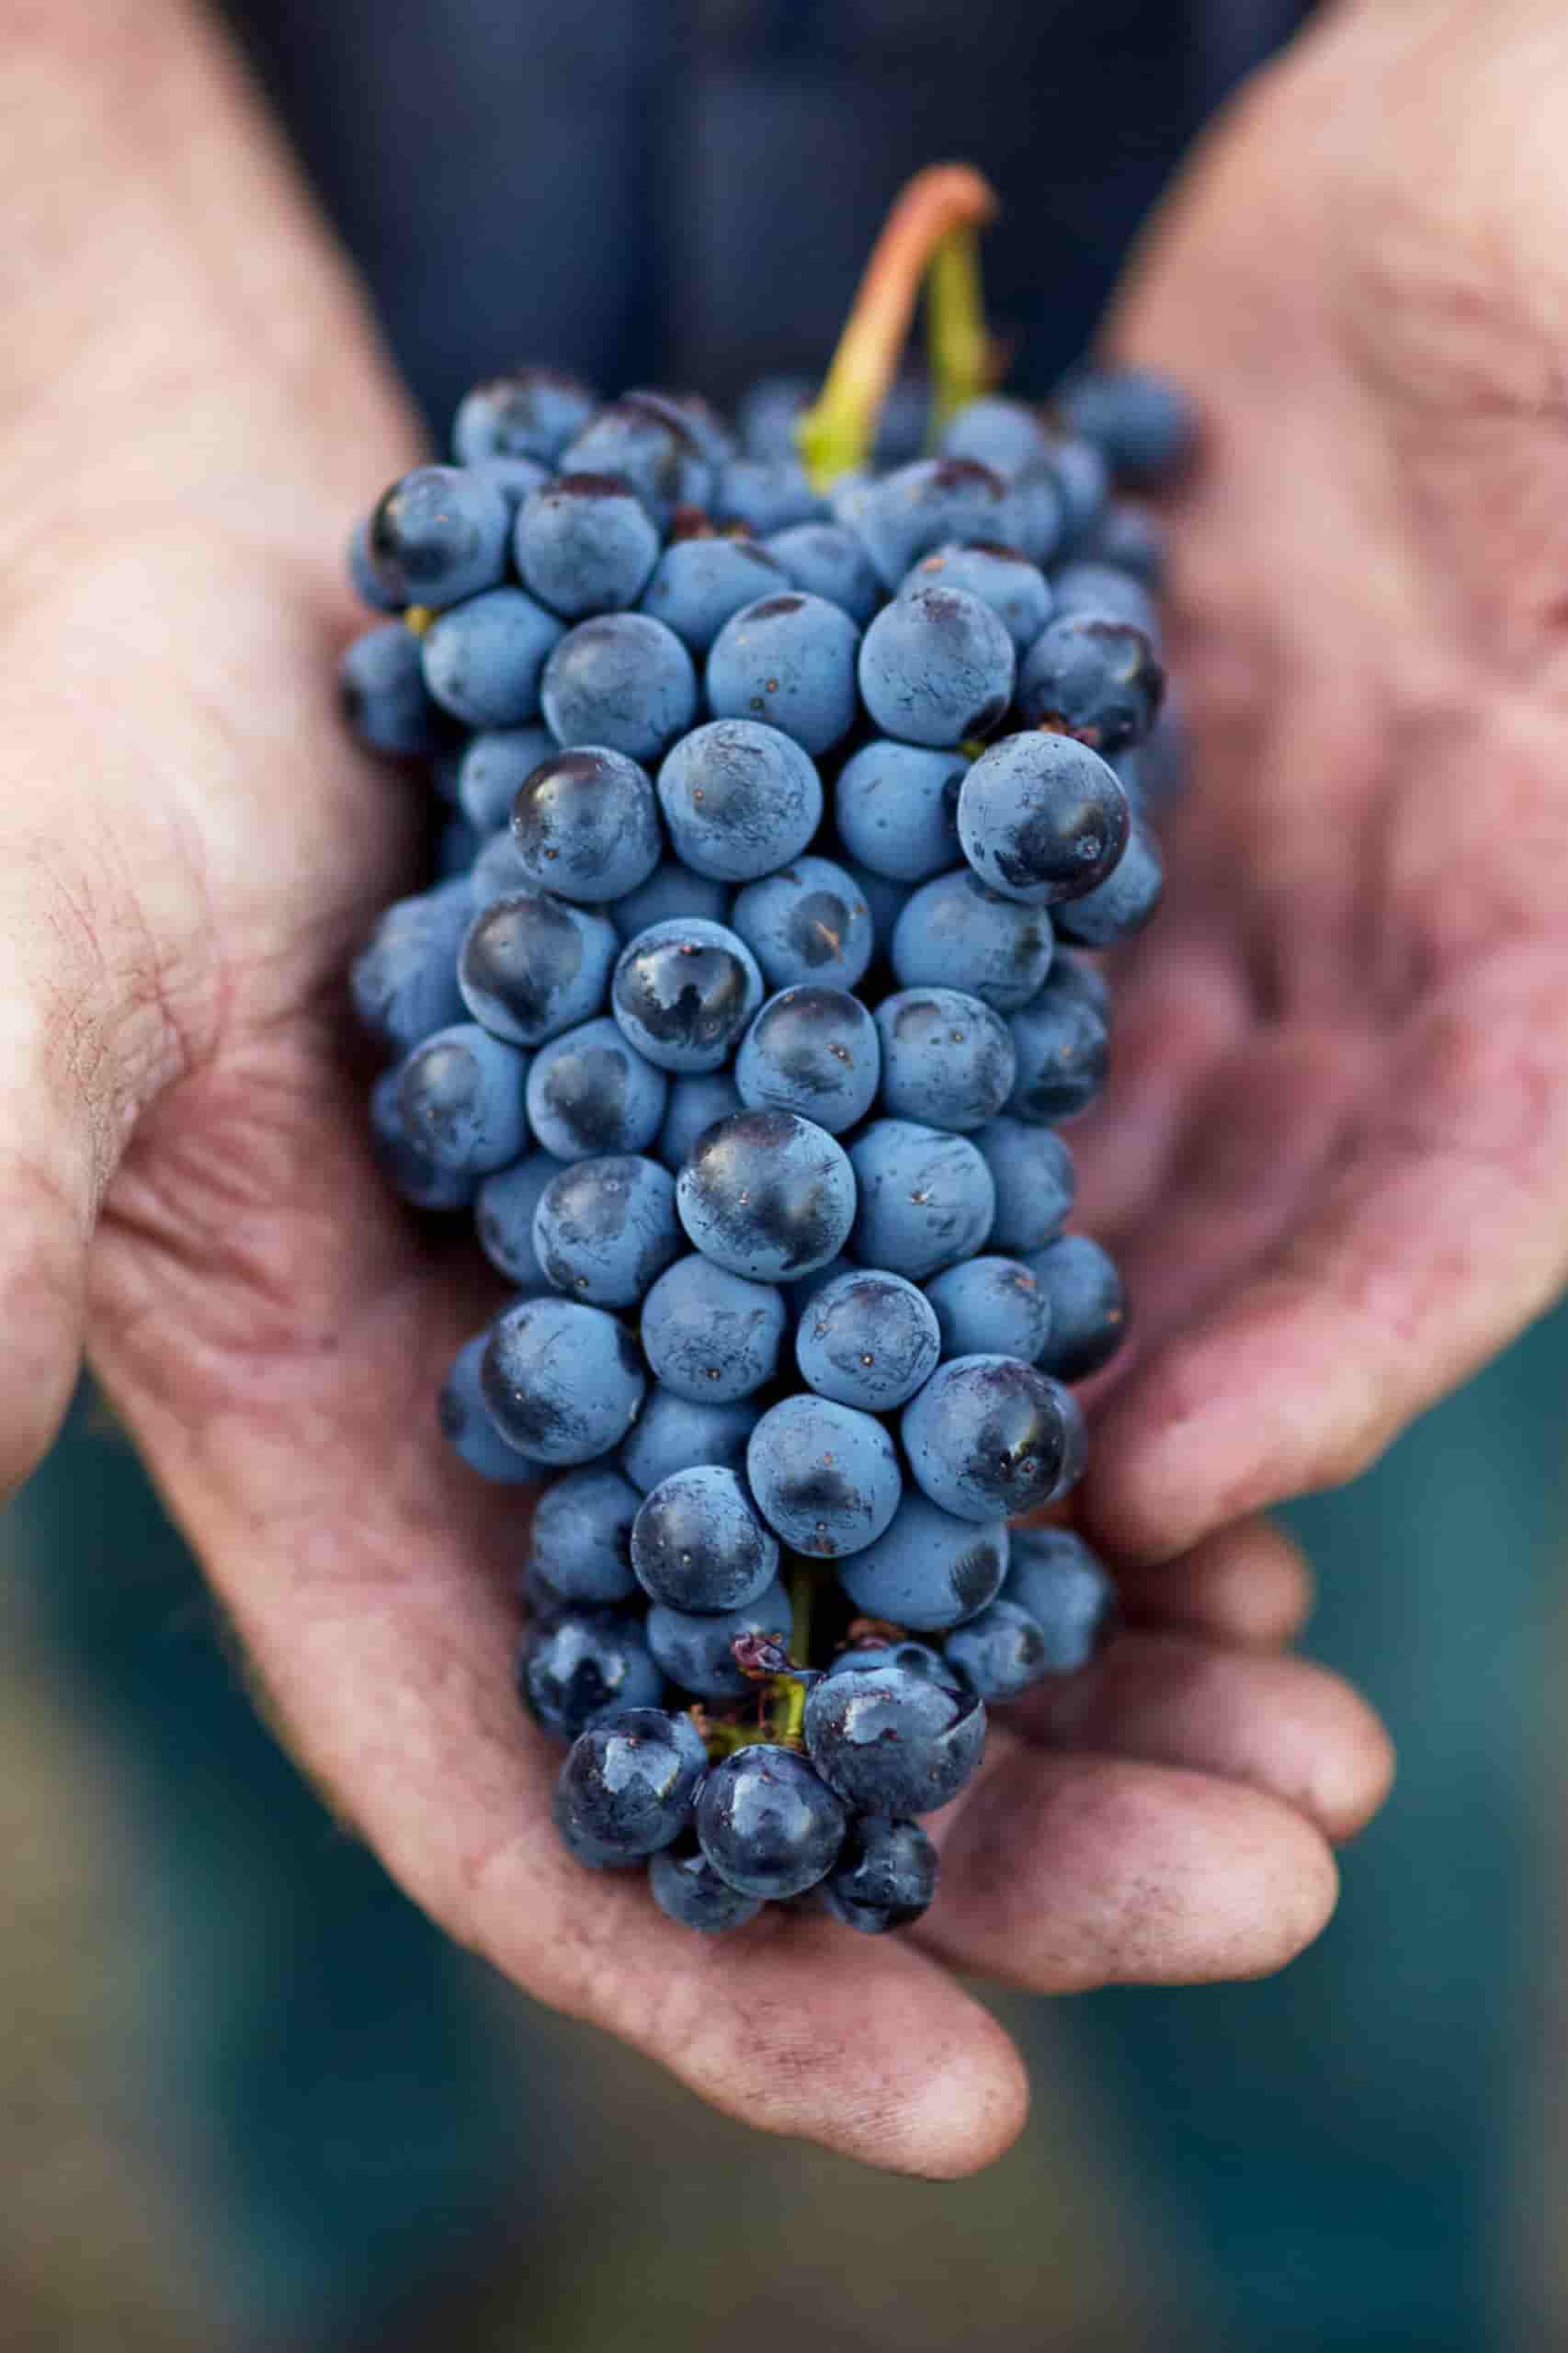 A bunch of grapes being held in a person's hands